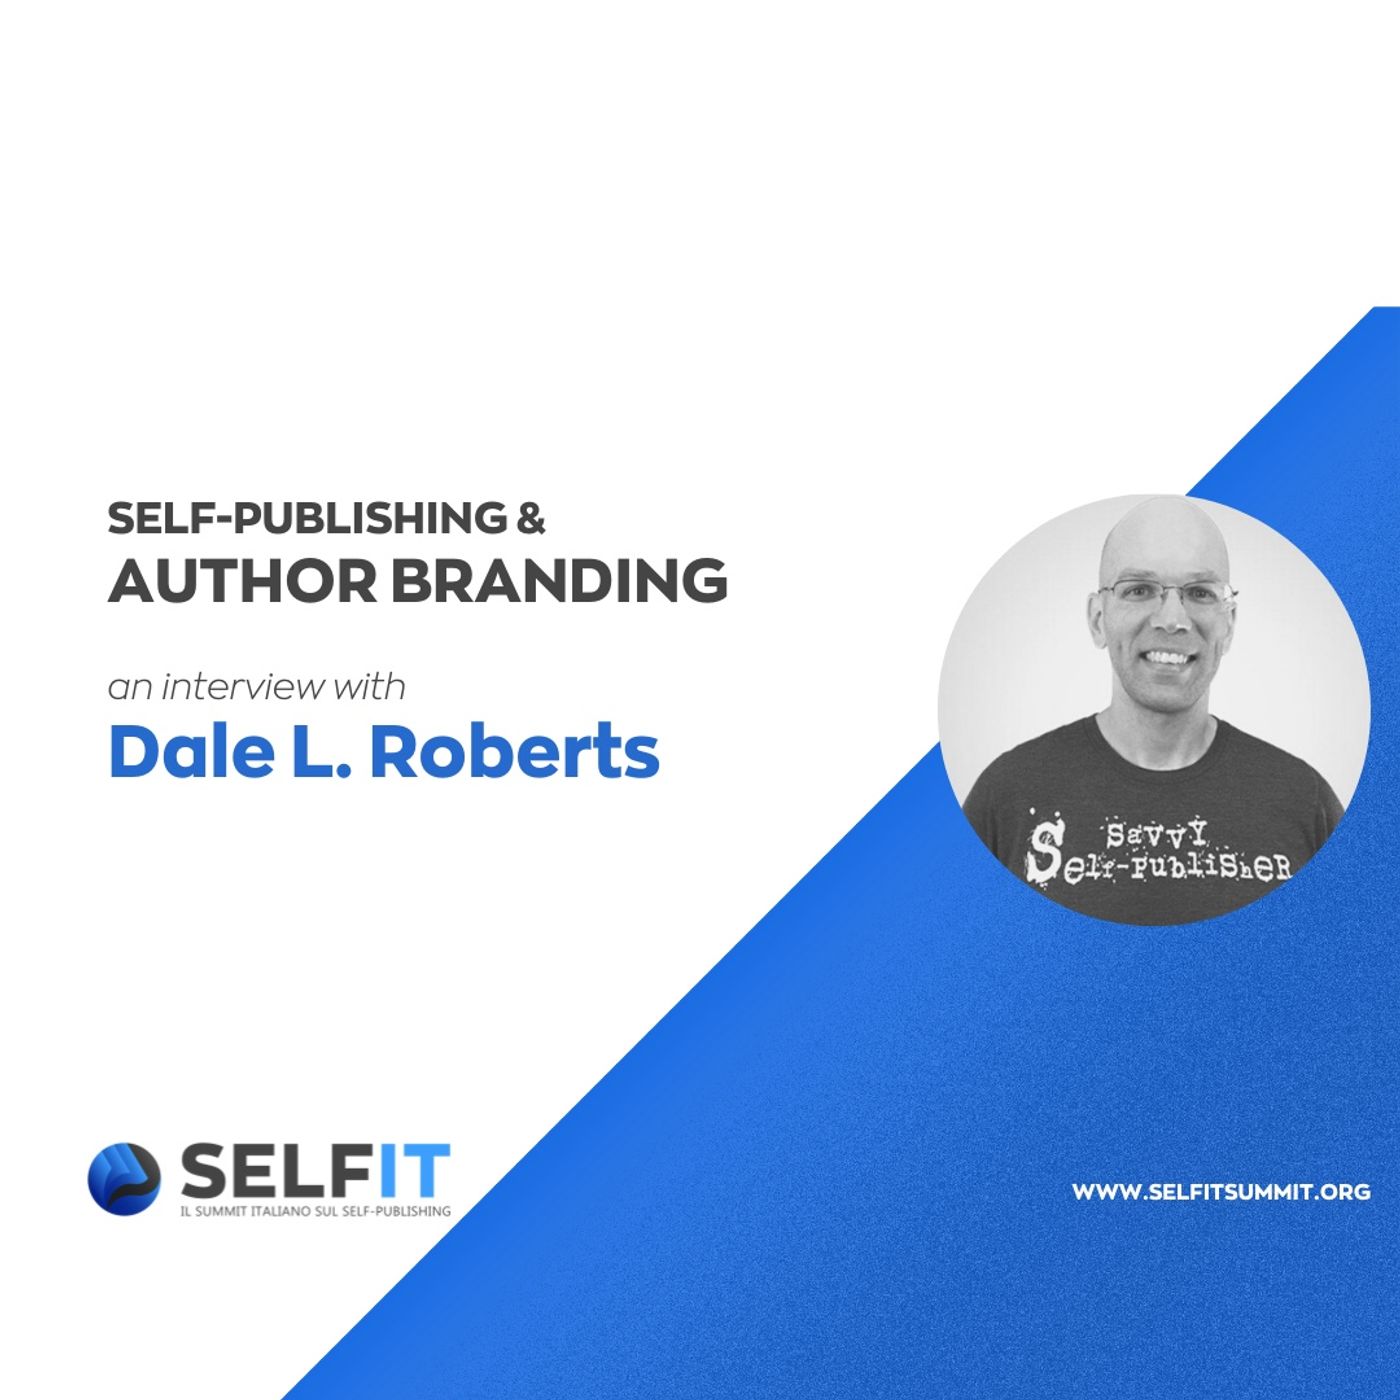 Selfit Summit - Self-Publishing and Author Branding - An interview with Dale L. Roberts (English)